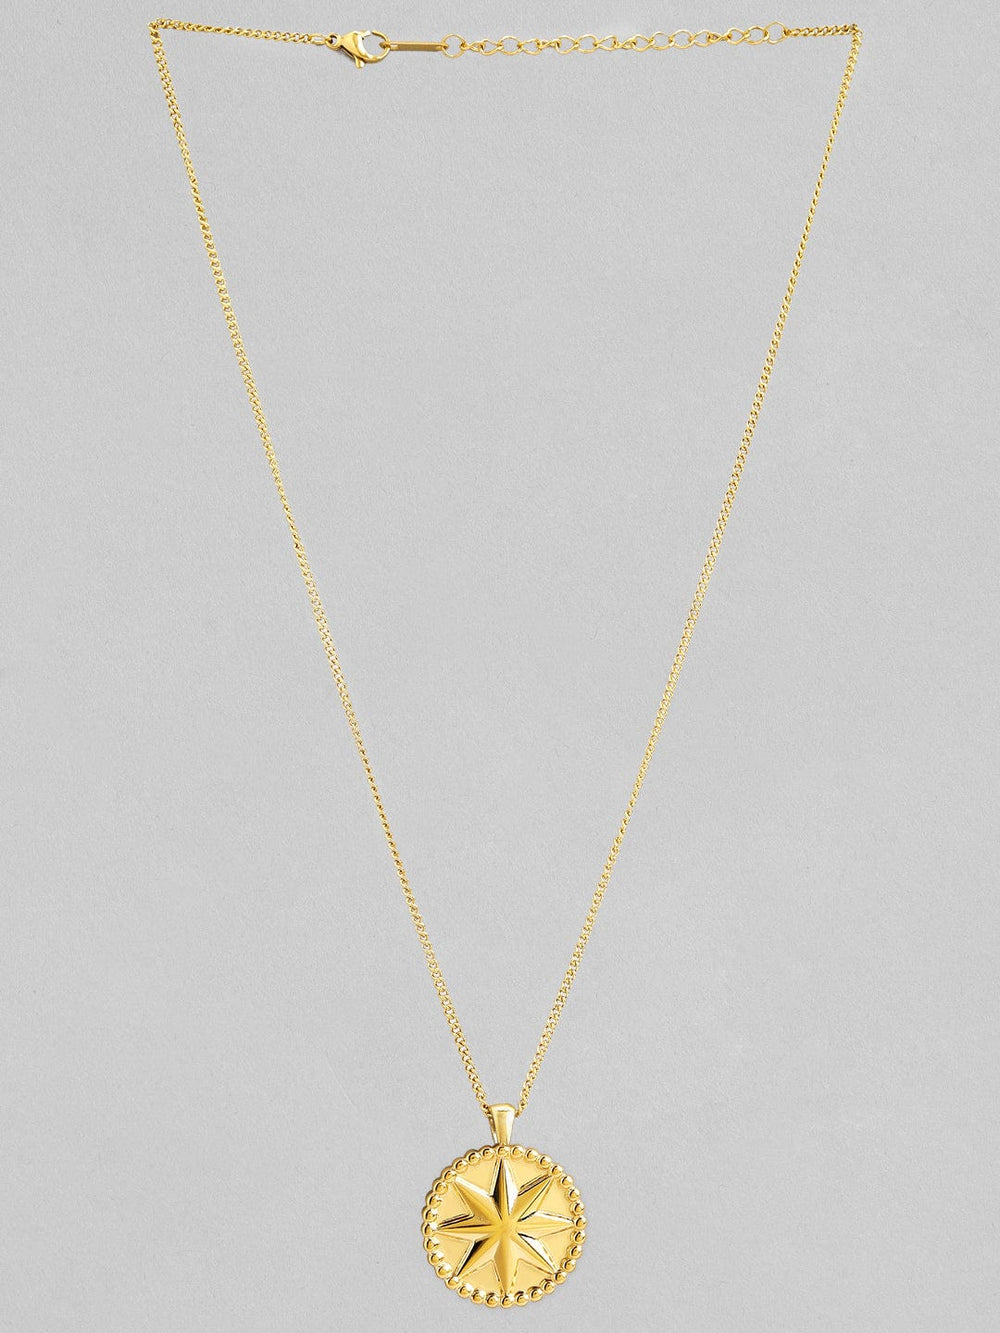 Rubans Voguish 18K Gold Plated Stainless Steel Waterproof Chain With Star Embossed Pendant. Chain & Necklaces